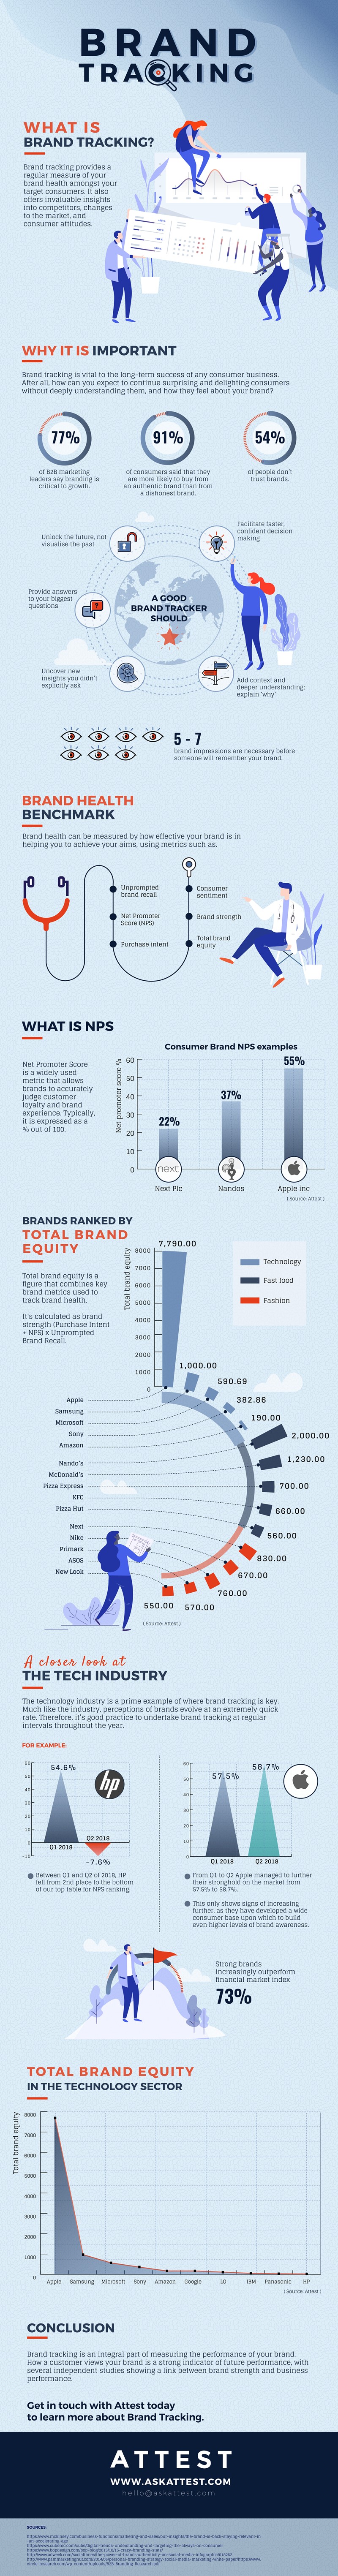 Brand Tracking: What Is It?